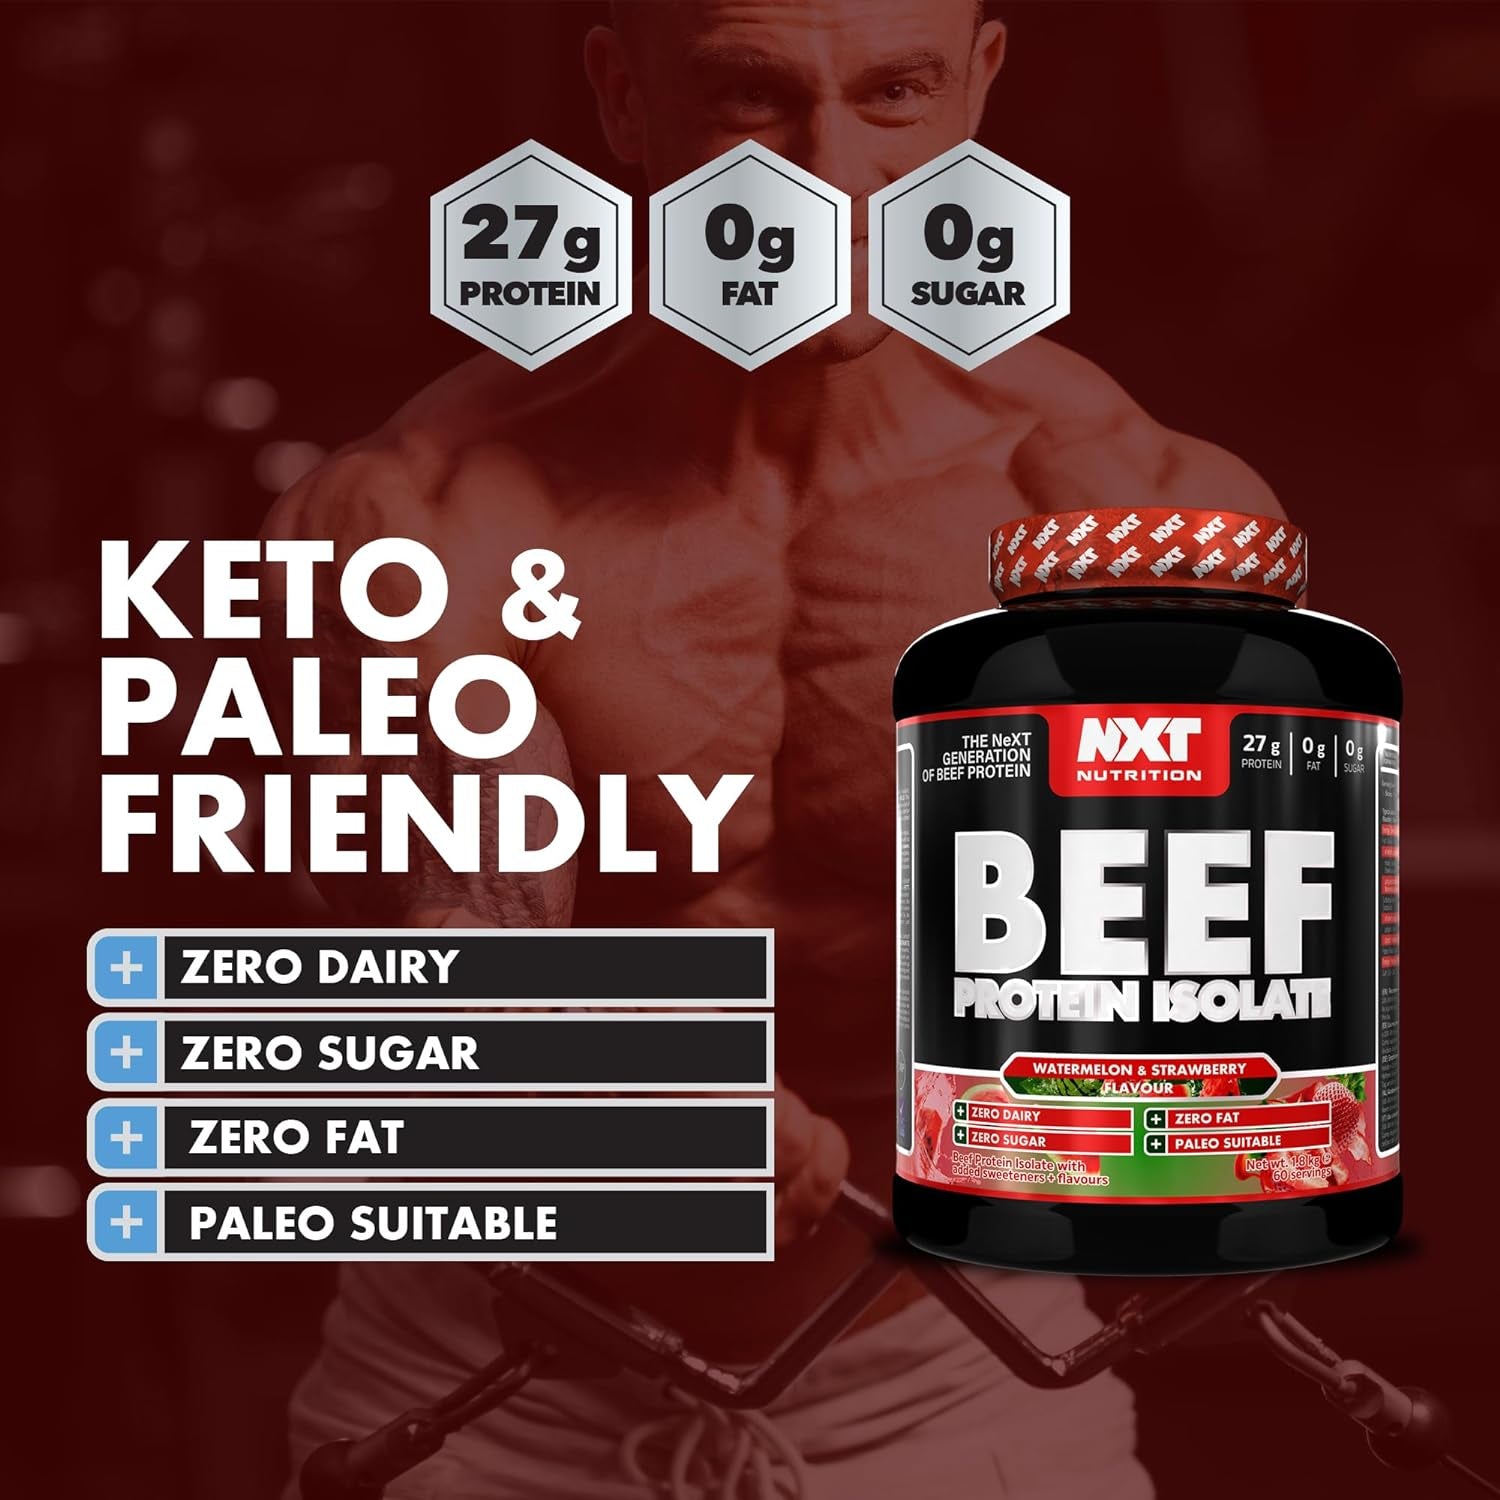 Beef Protein Isolate Powder - Protein Powder High in Natural Amino Acids - Paleo, Keto Friendly - Dairy and Gluten Free - Muscle Recovery | 1.8Kg (Watermelon & Strawberry)